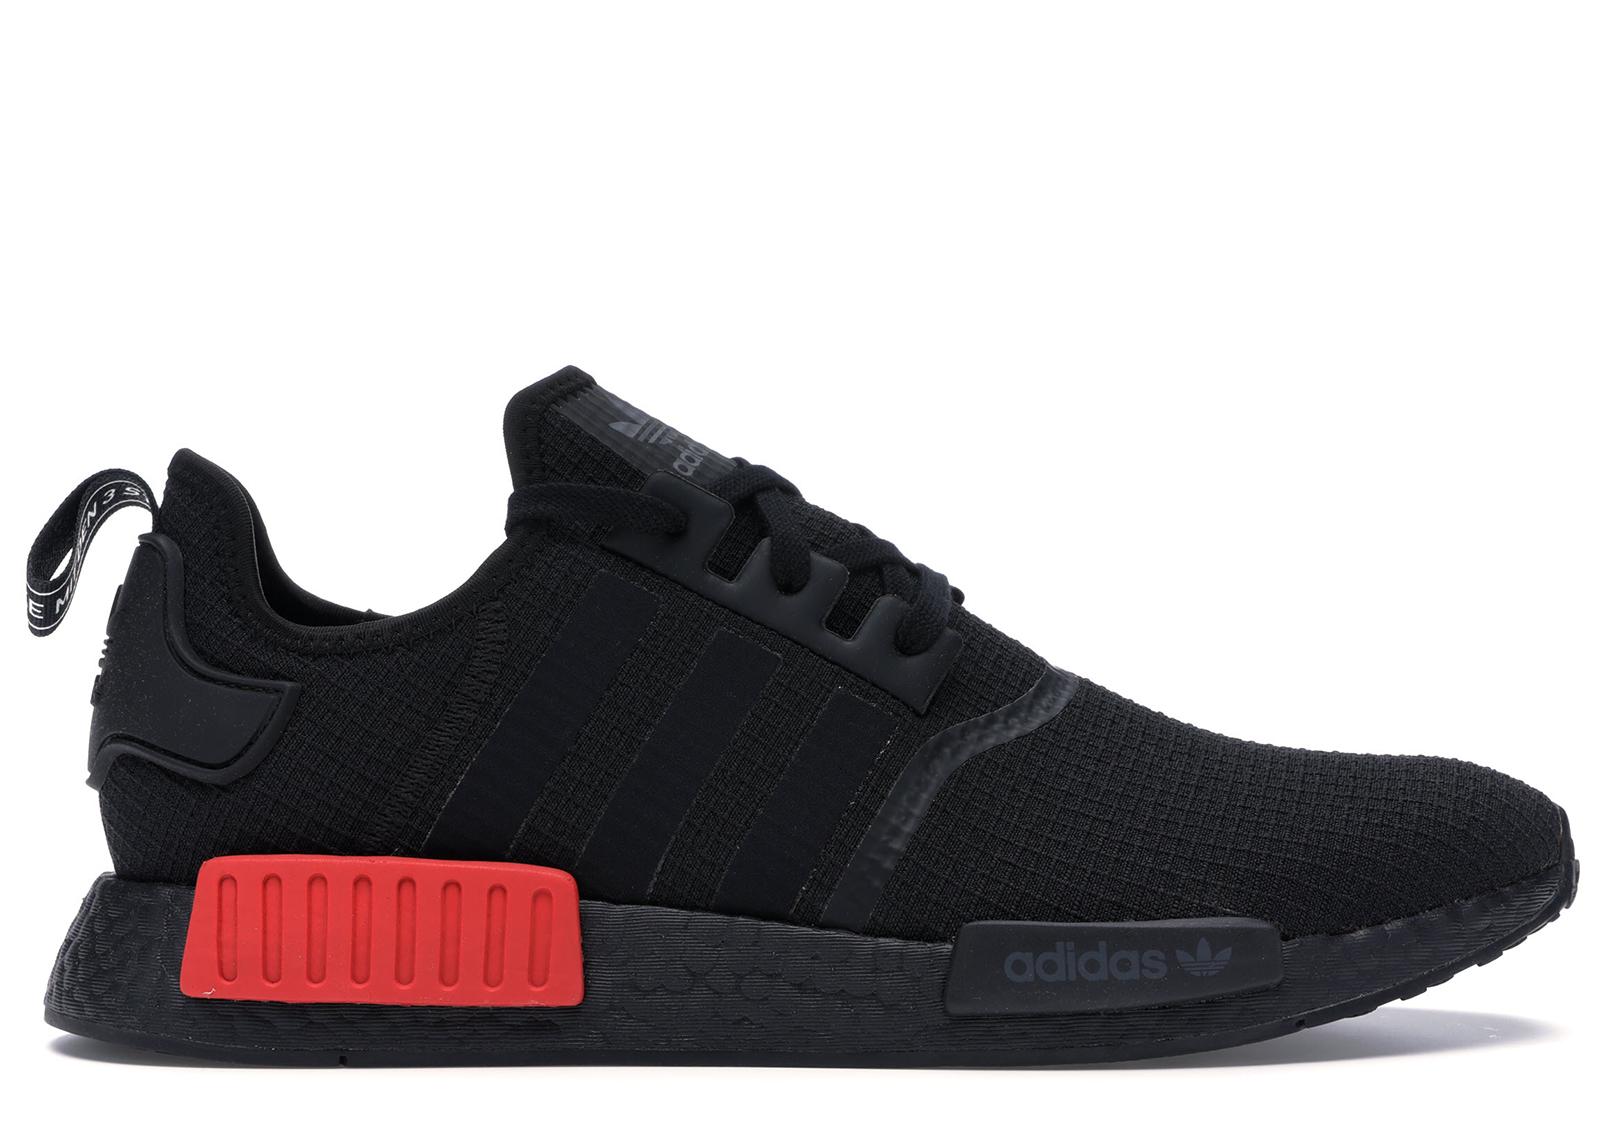 adidas Nmd R1 Core Black Lush Red for 